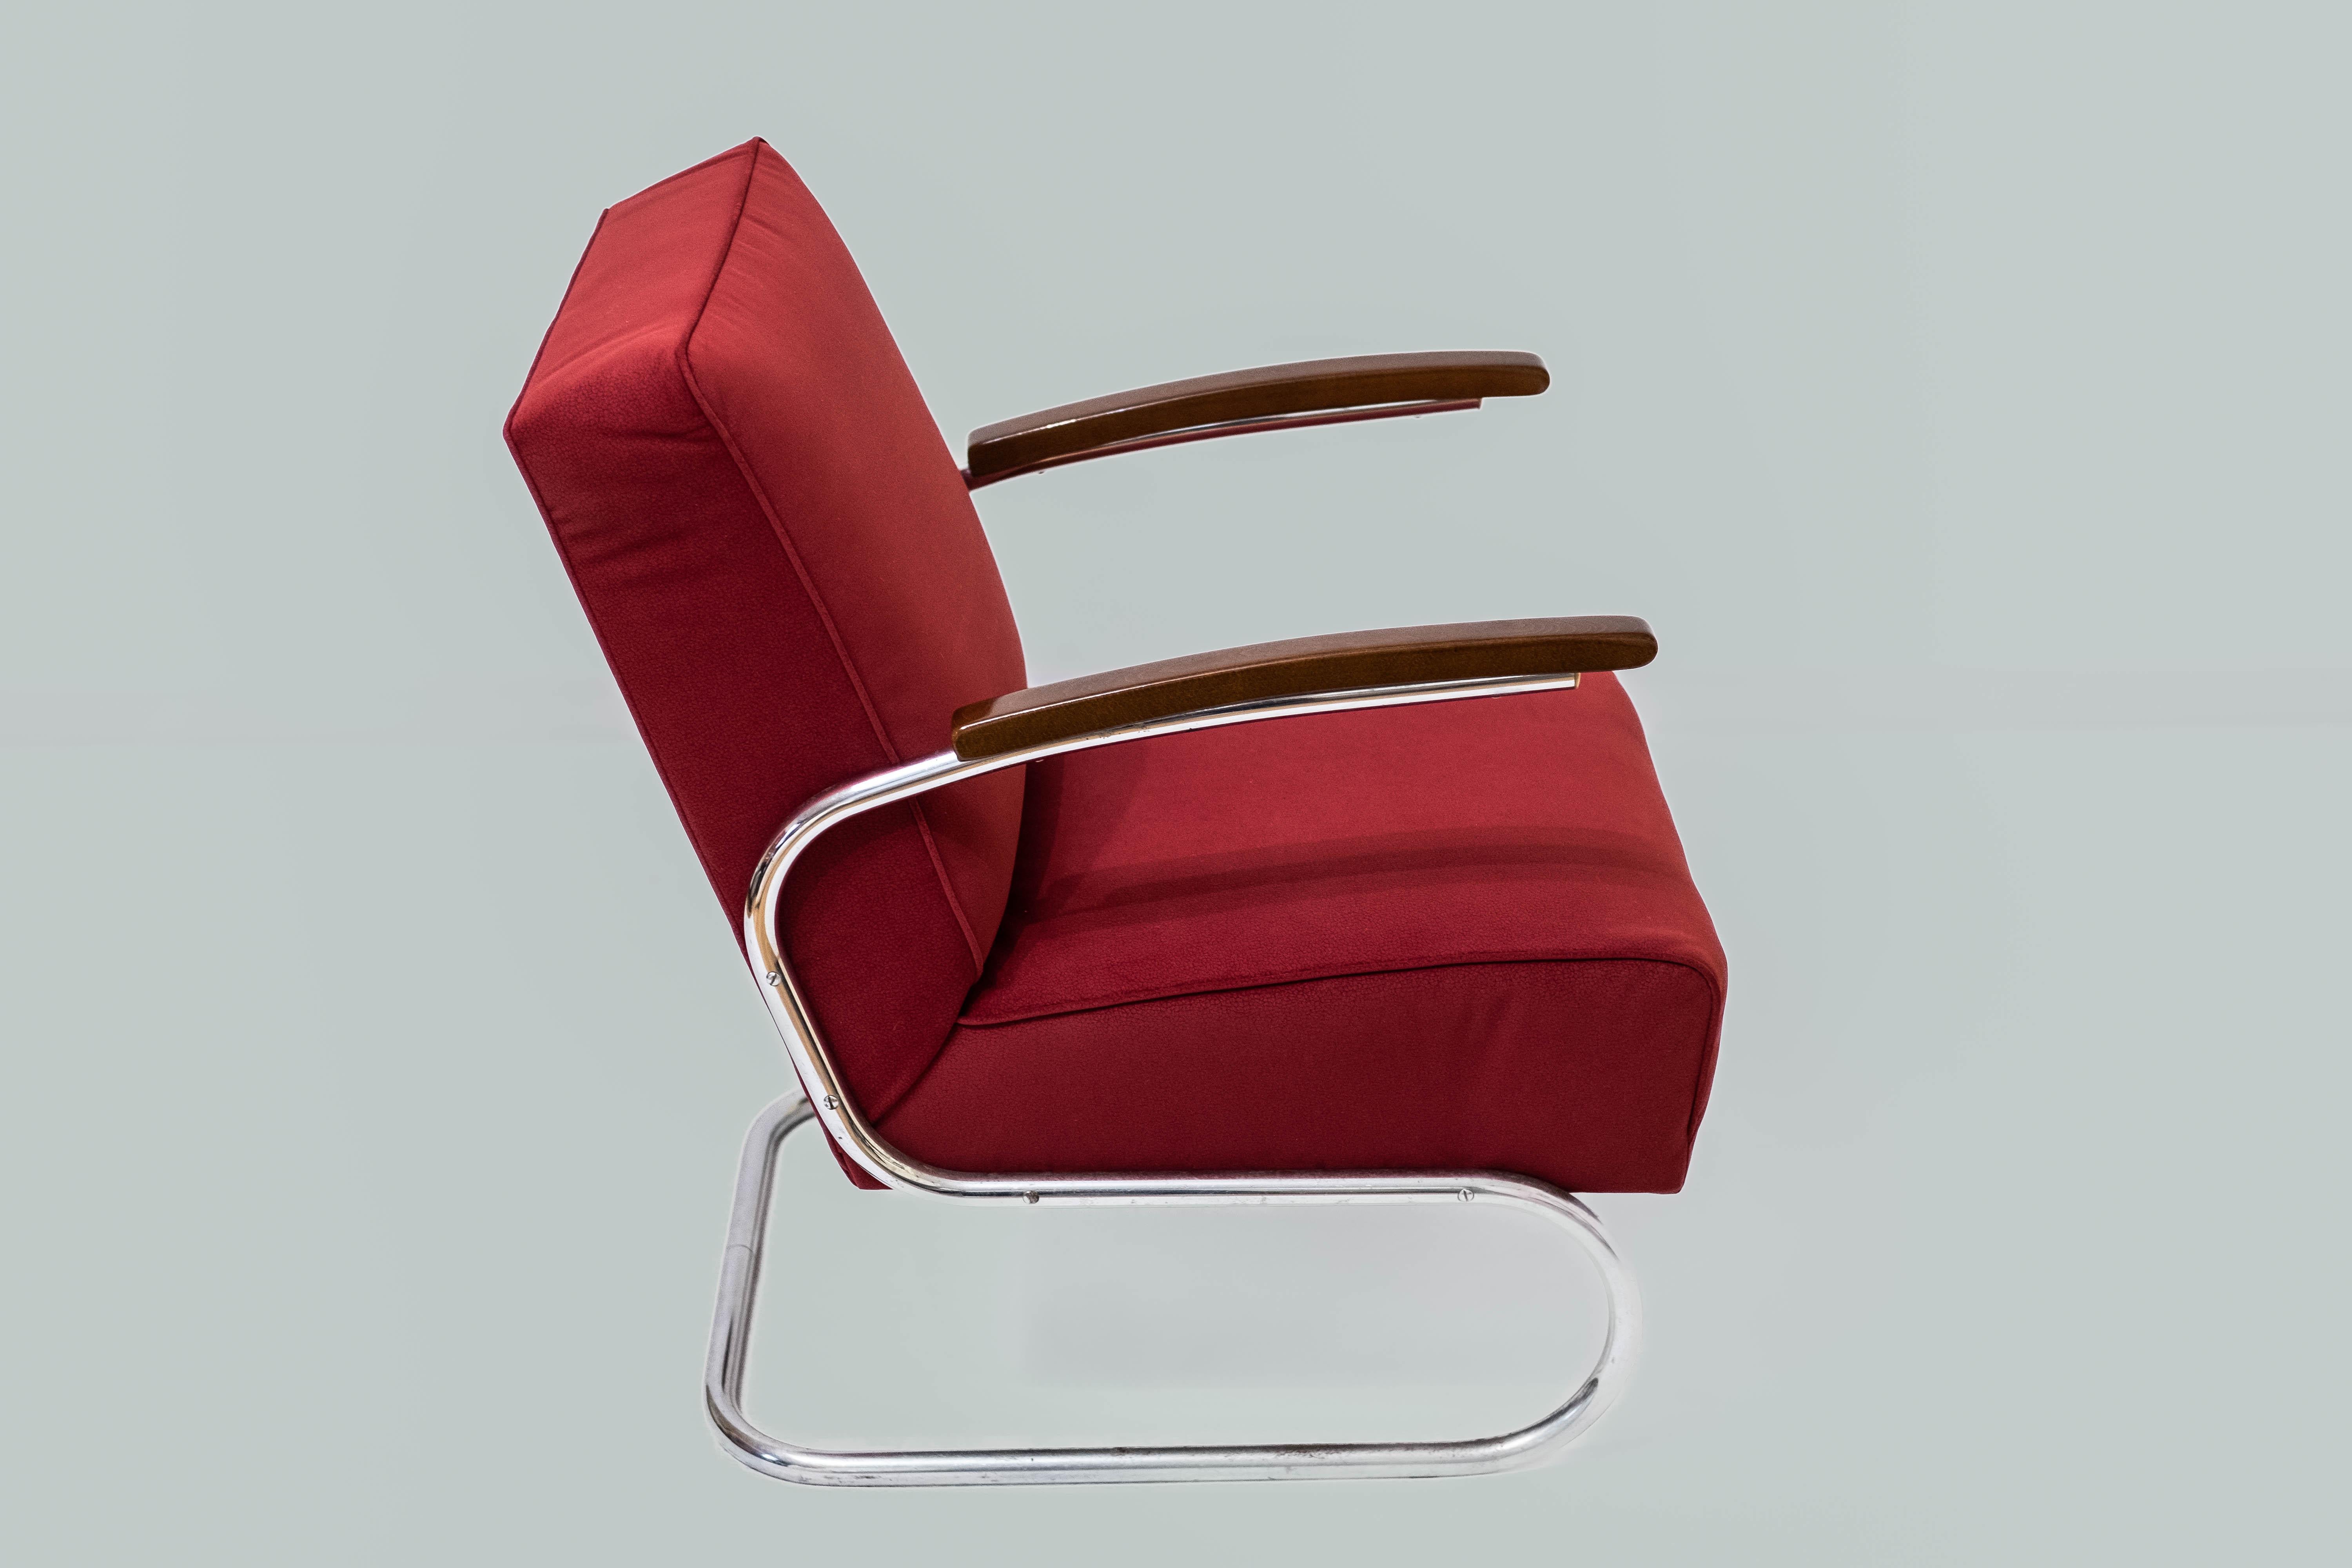 Bauhaus Steelpipe-Fauteuil by Walter Knoll for Tonet Brothers (Vienna, 1935) For Sale 6